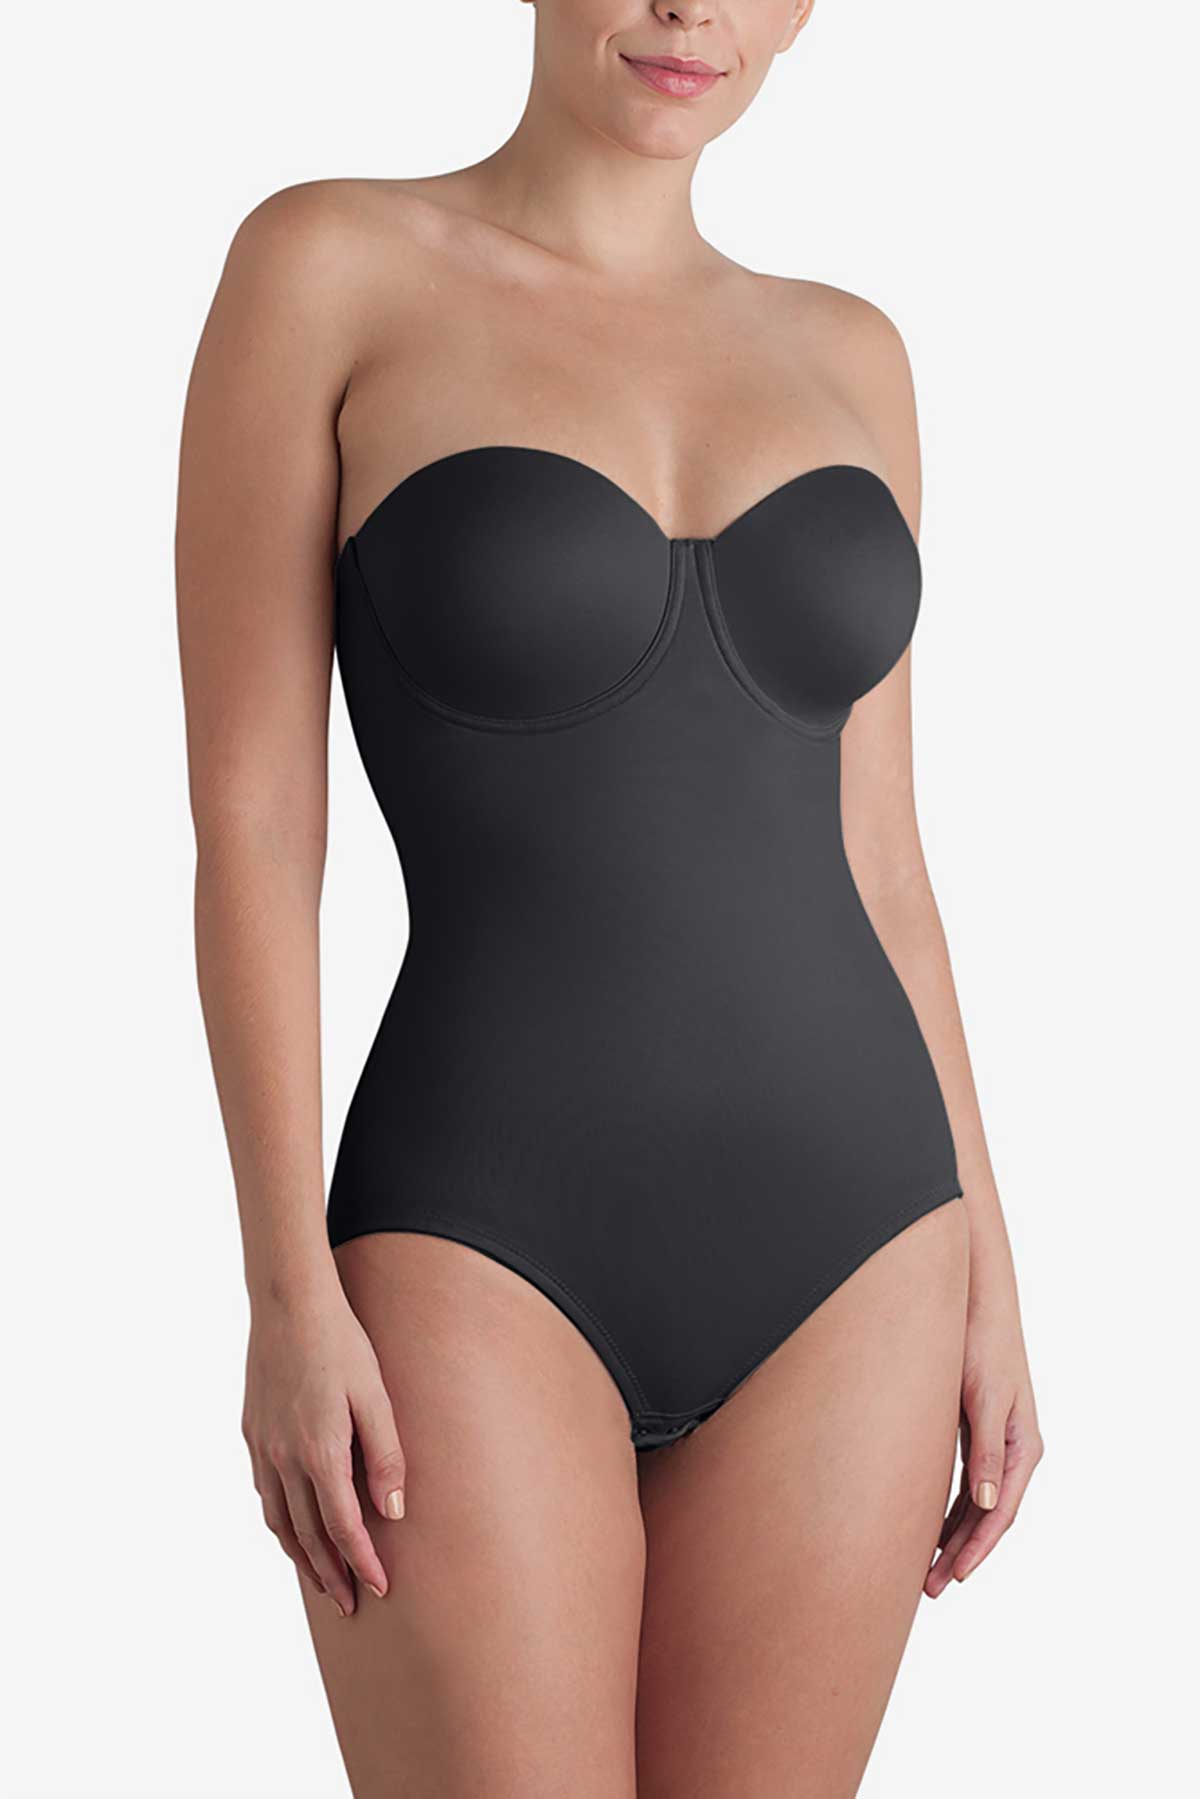 Find Cheap, Fashionable and Slimming strapless shapewear bodysuit 